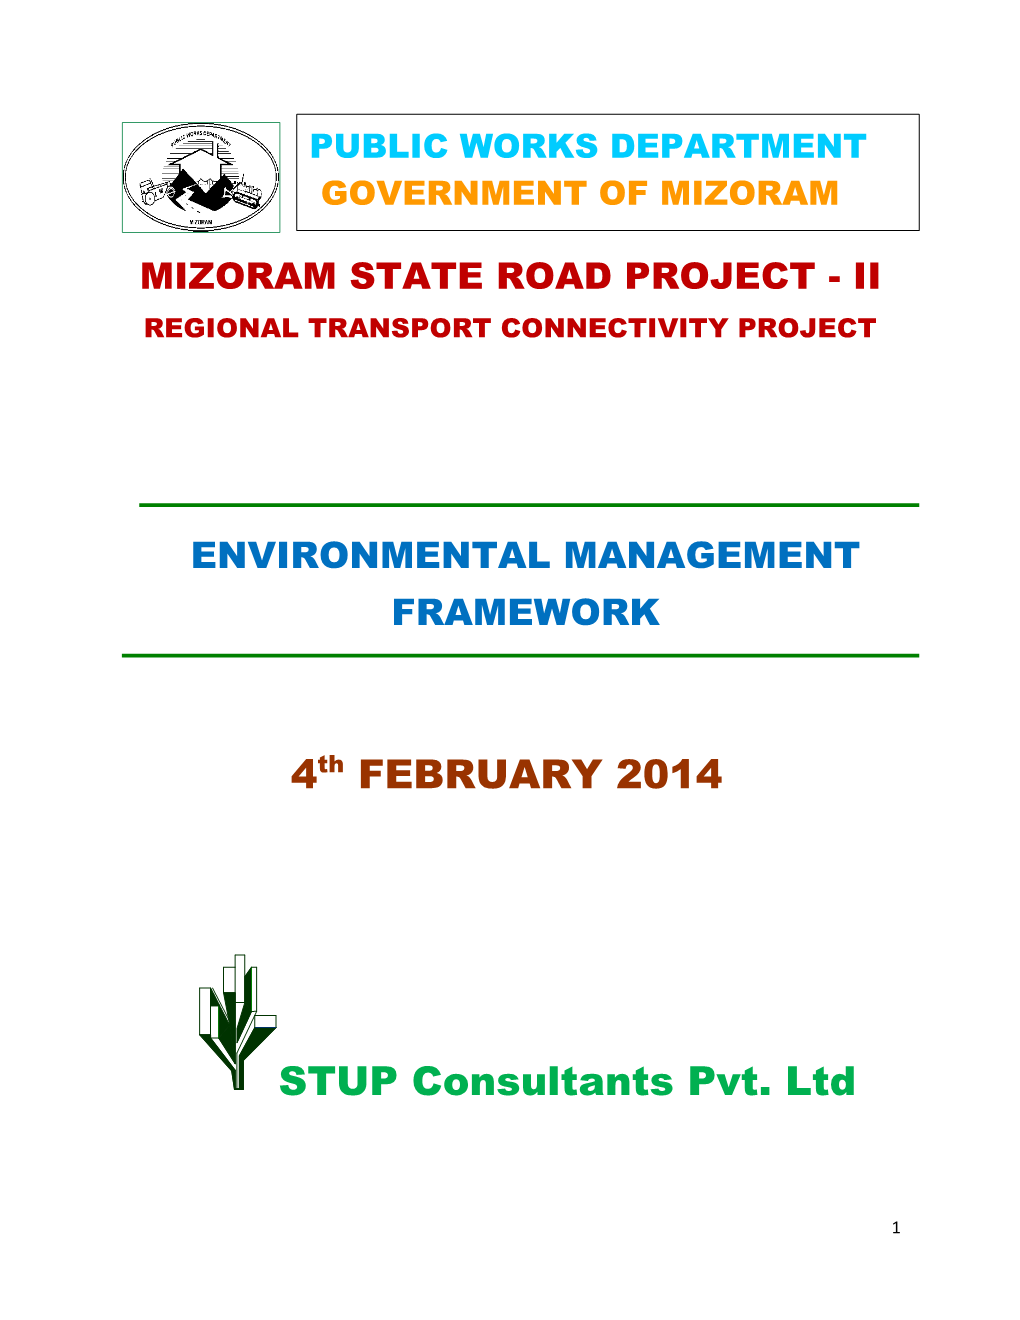 4Th FEBRUARY 2014 STUP Consultants Pvt